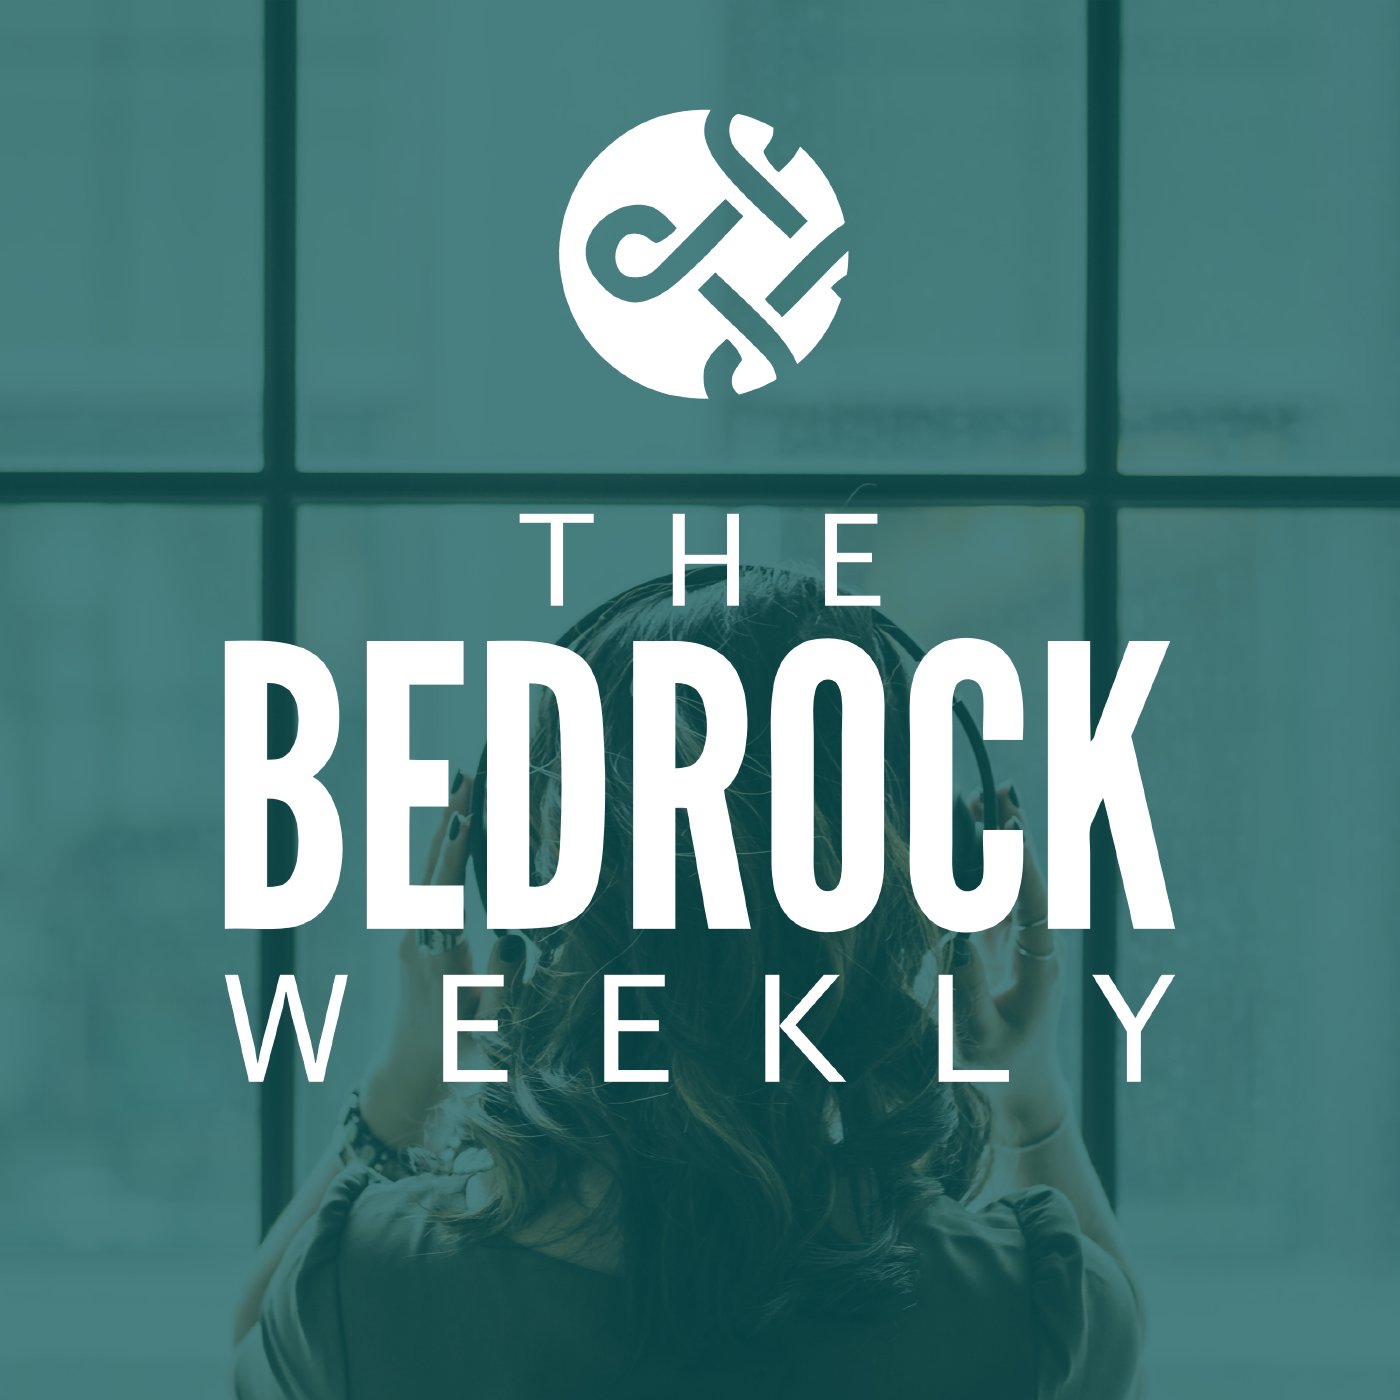 The Bedrock Weekly \\  Ephesians Chapter 5  Part 3